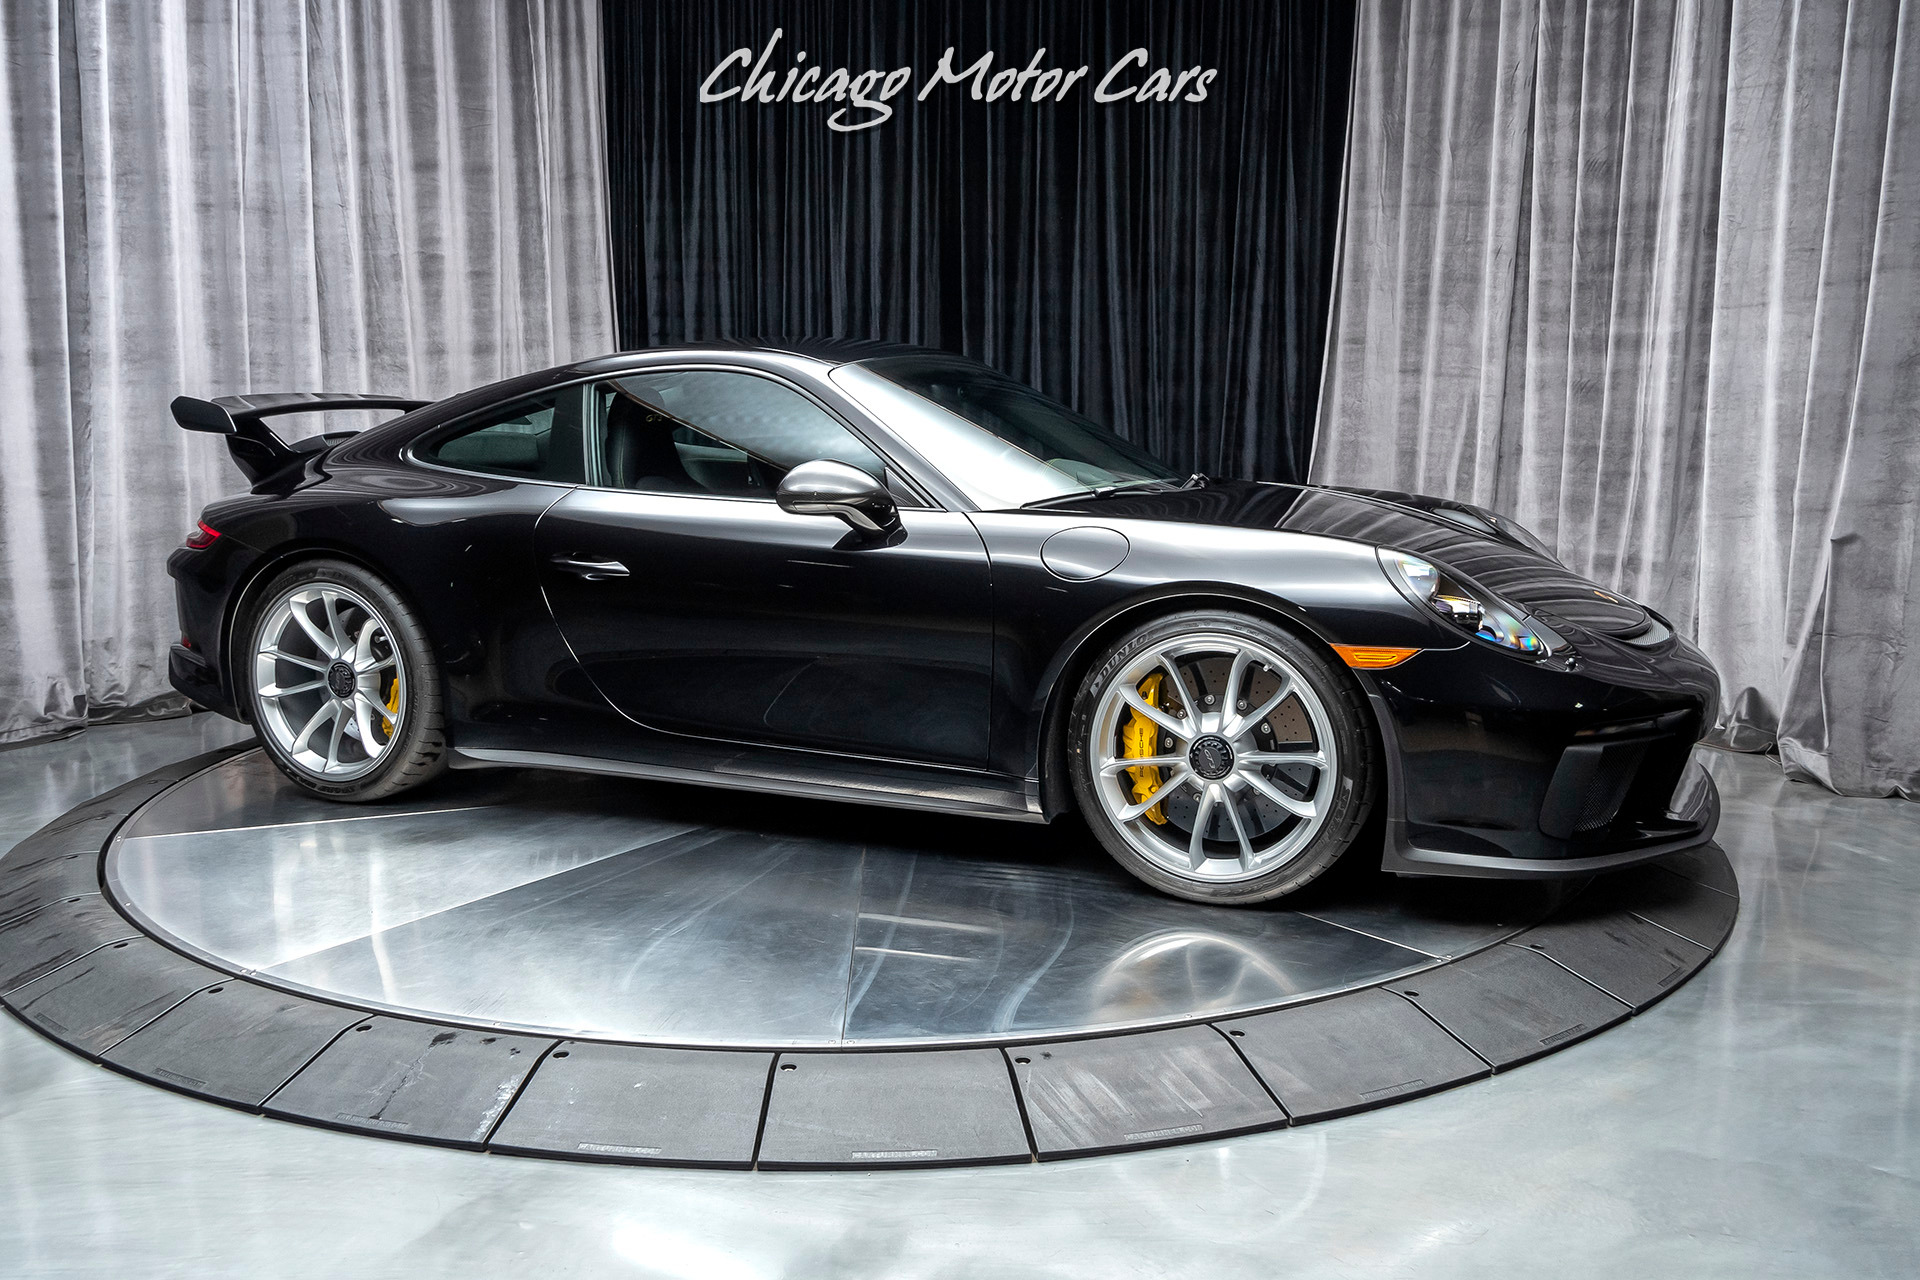 Used-2019-Porsche-911-GT3-Coupe-MSRP-183K-1K-MILES-MANUAL-TRANS-ENTIRE-CAR-PROTECTION